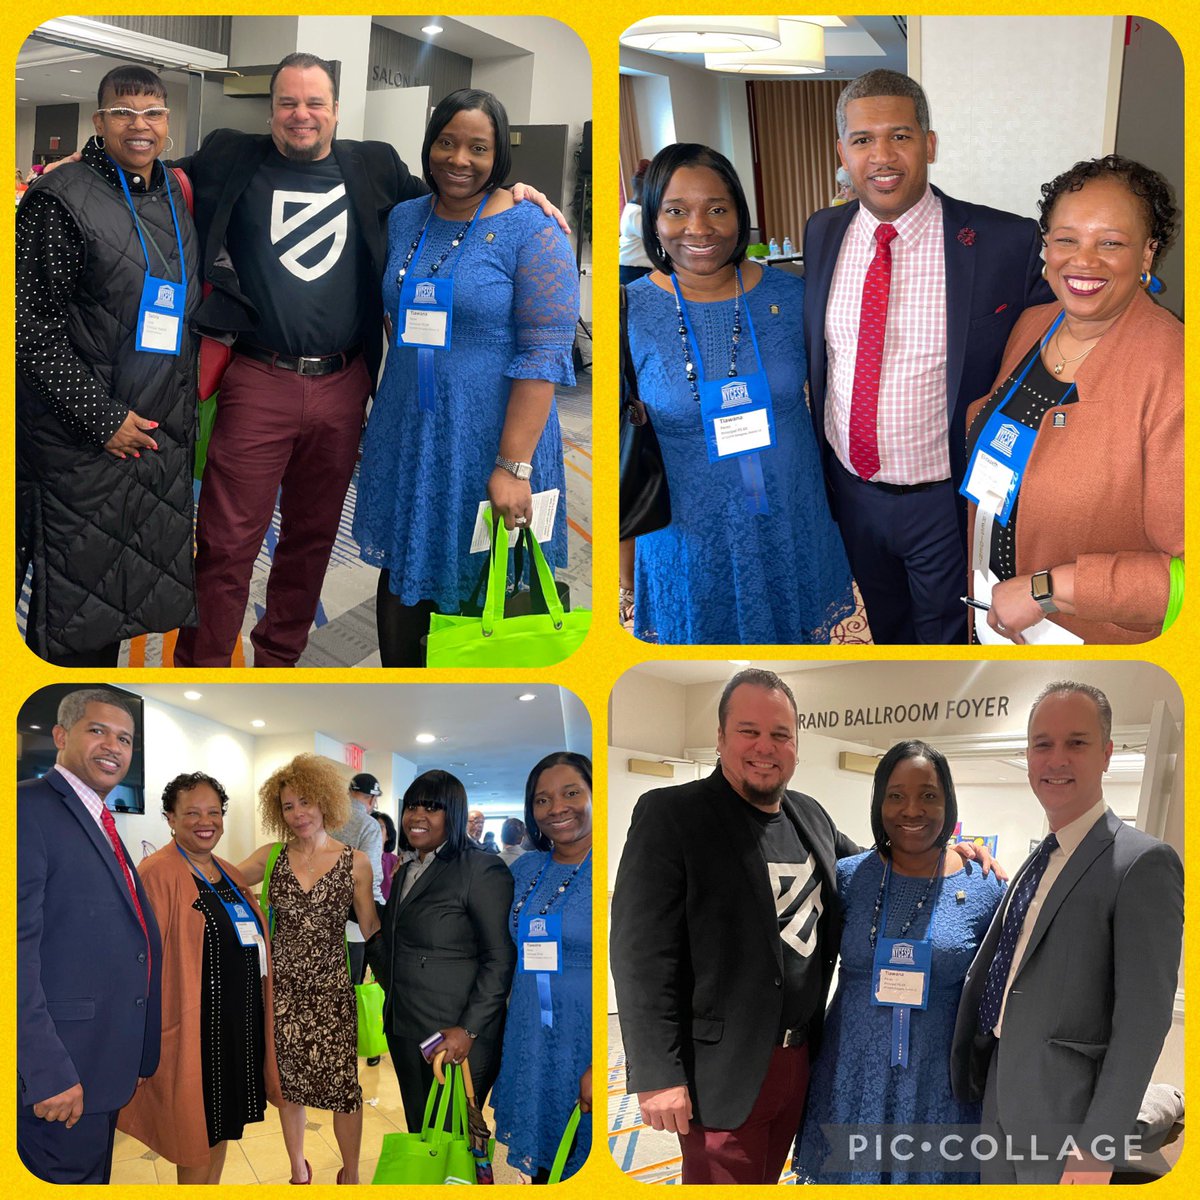 Great to see and connect with so many impactful leaders in one space! Grateful for the smiles and joy in the educational arena!💙 @NYCESPA @FollowCSA @HTLC154 @District14Supt @ddc427 @PS197MPrincipal